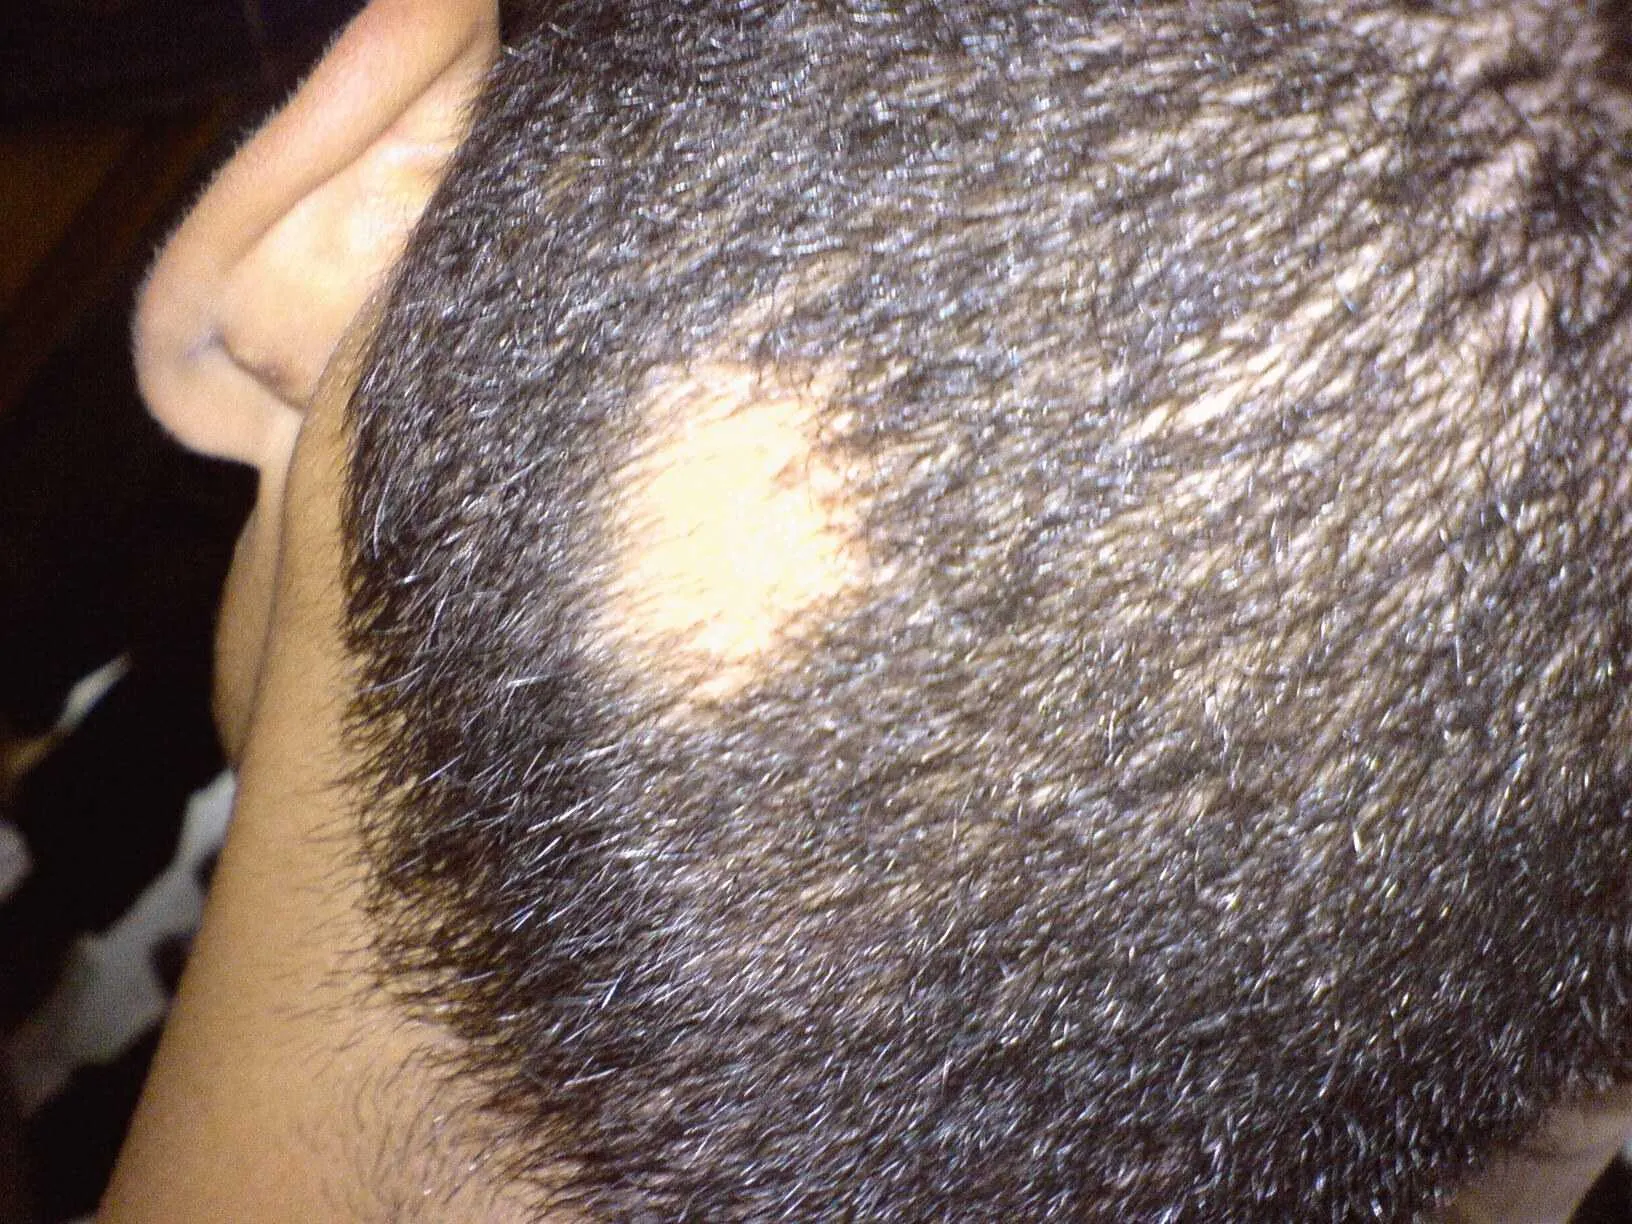 How to Stop Alopecia Areata from Spreading?